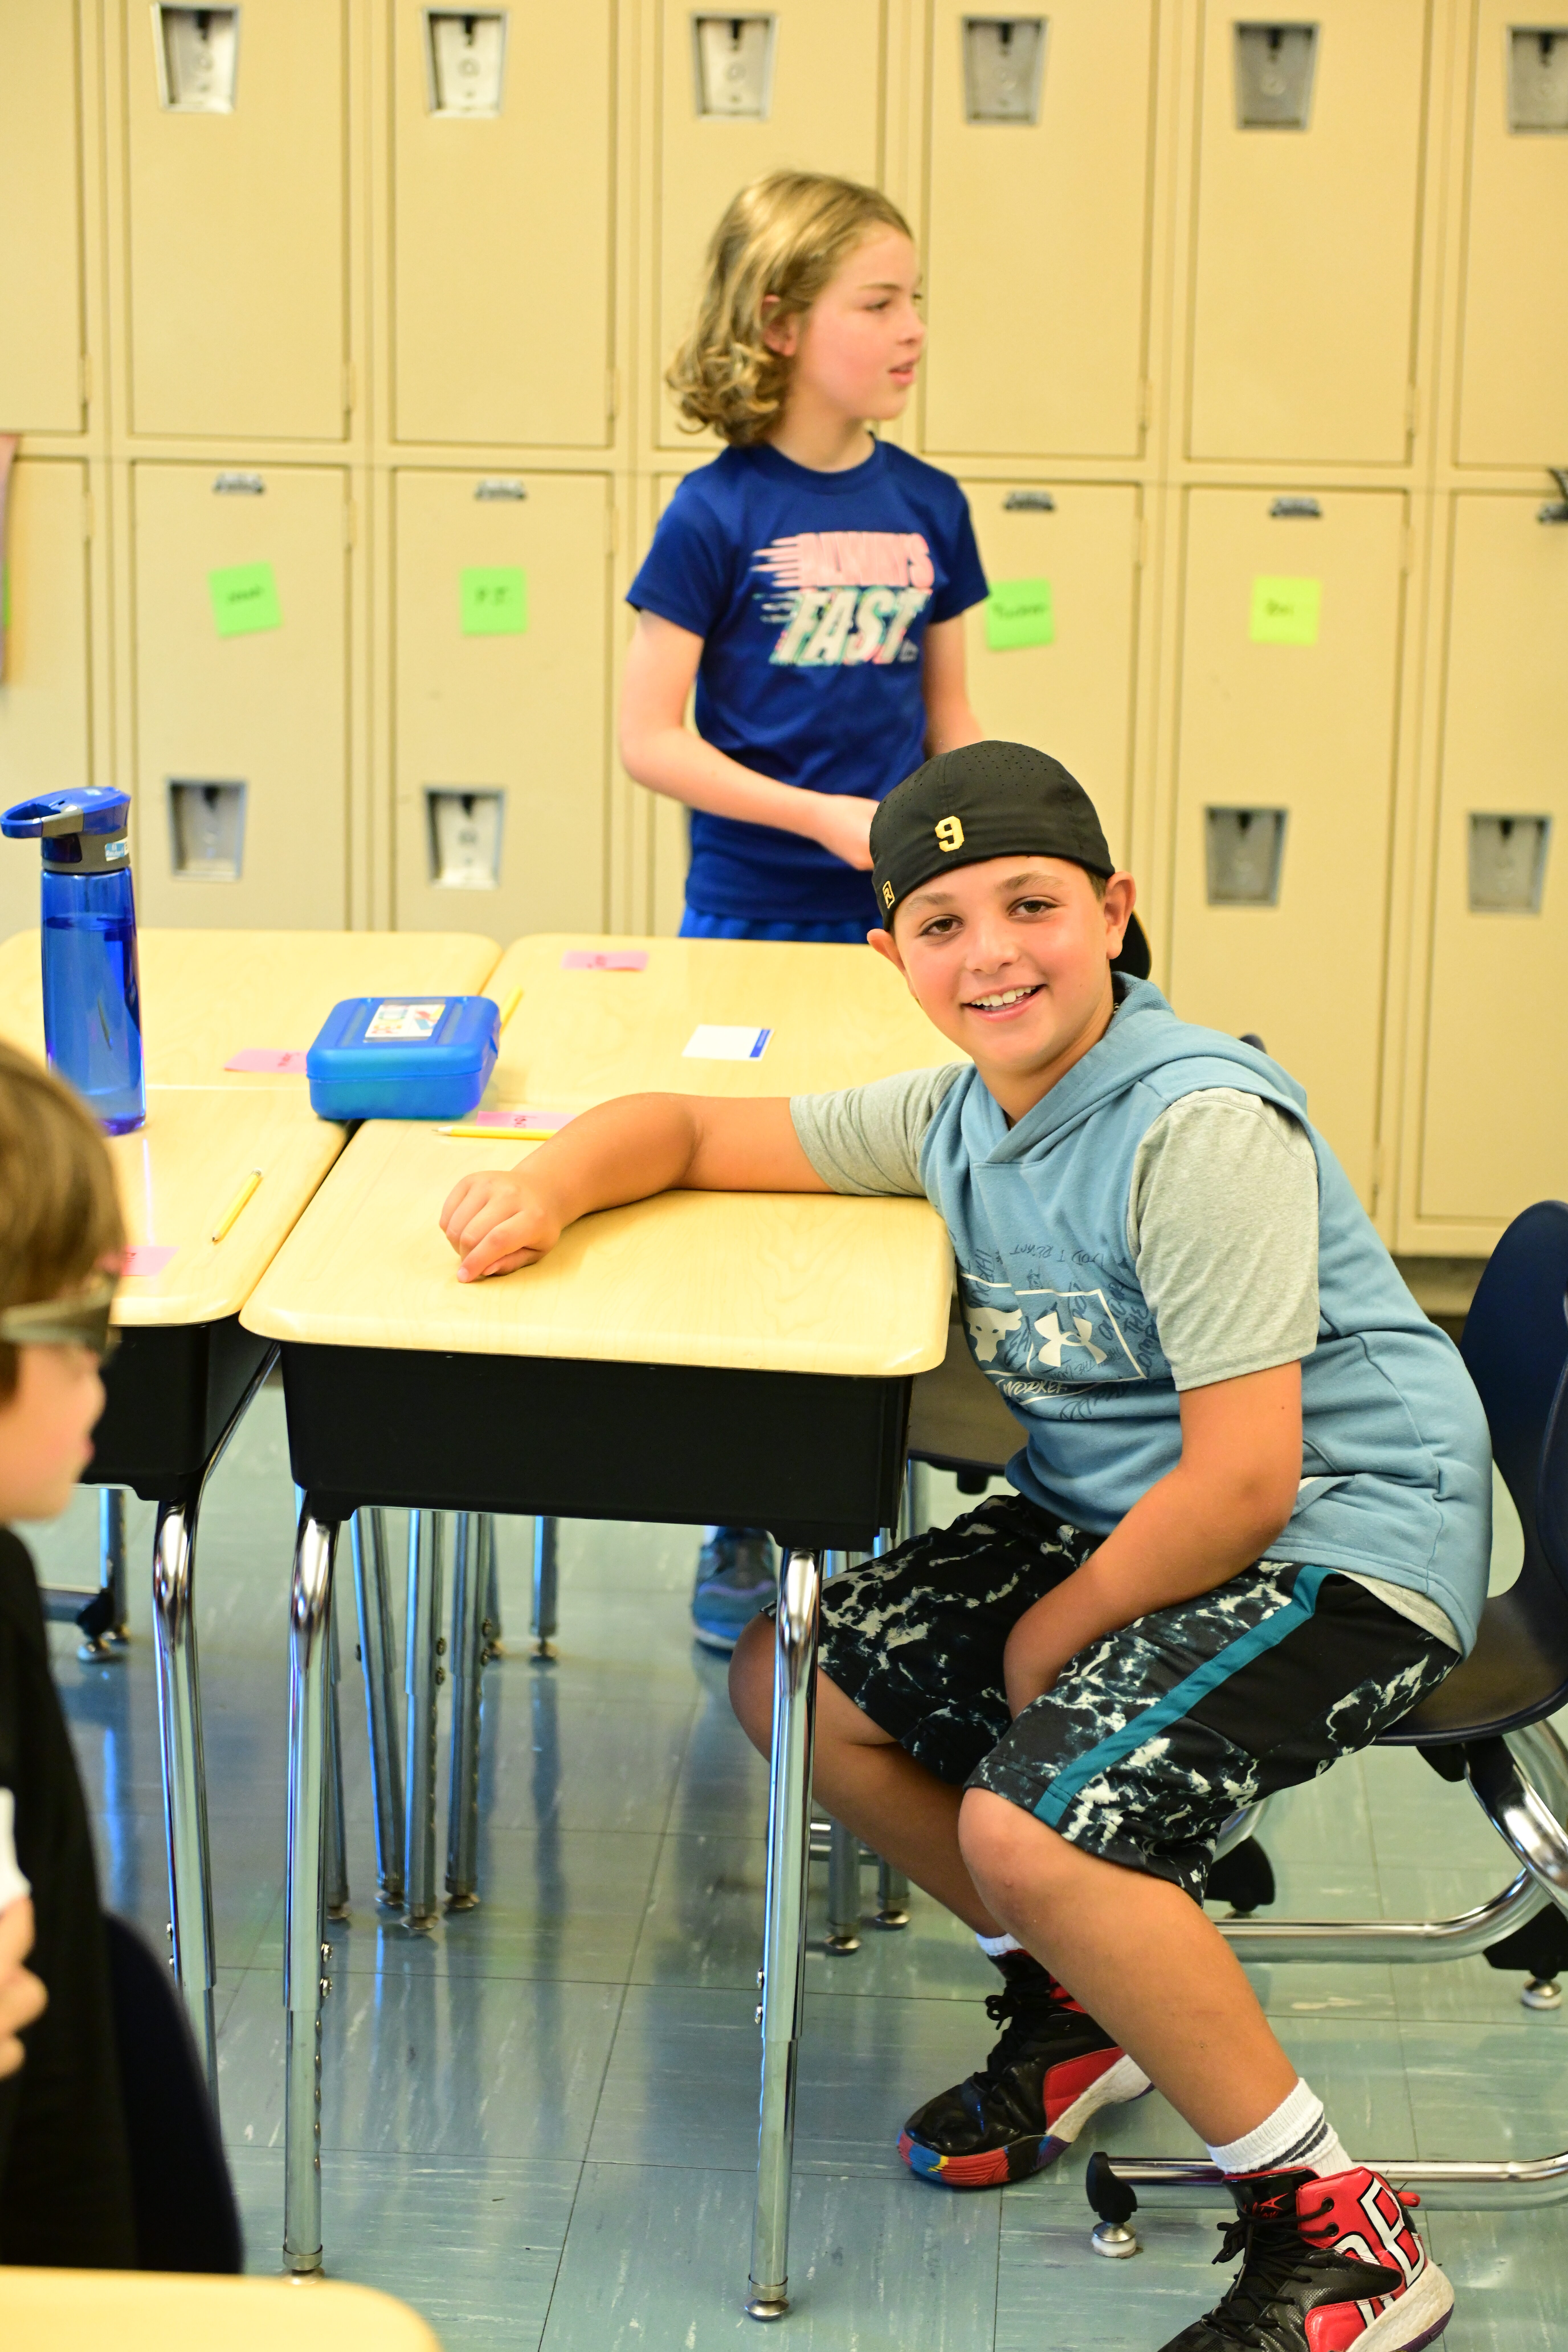 A student sits at a desk in a classroom at Fieldston Lower and smiles at the camera